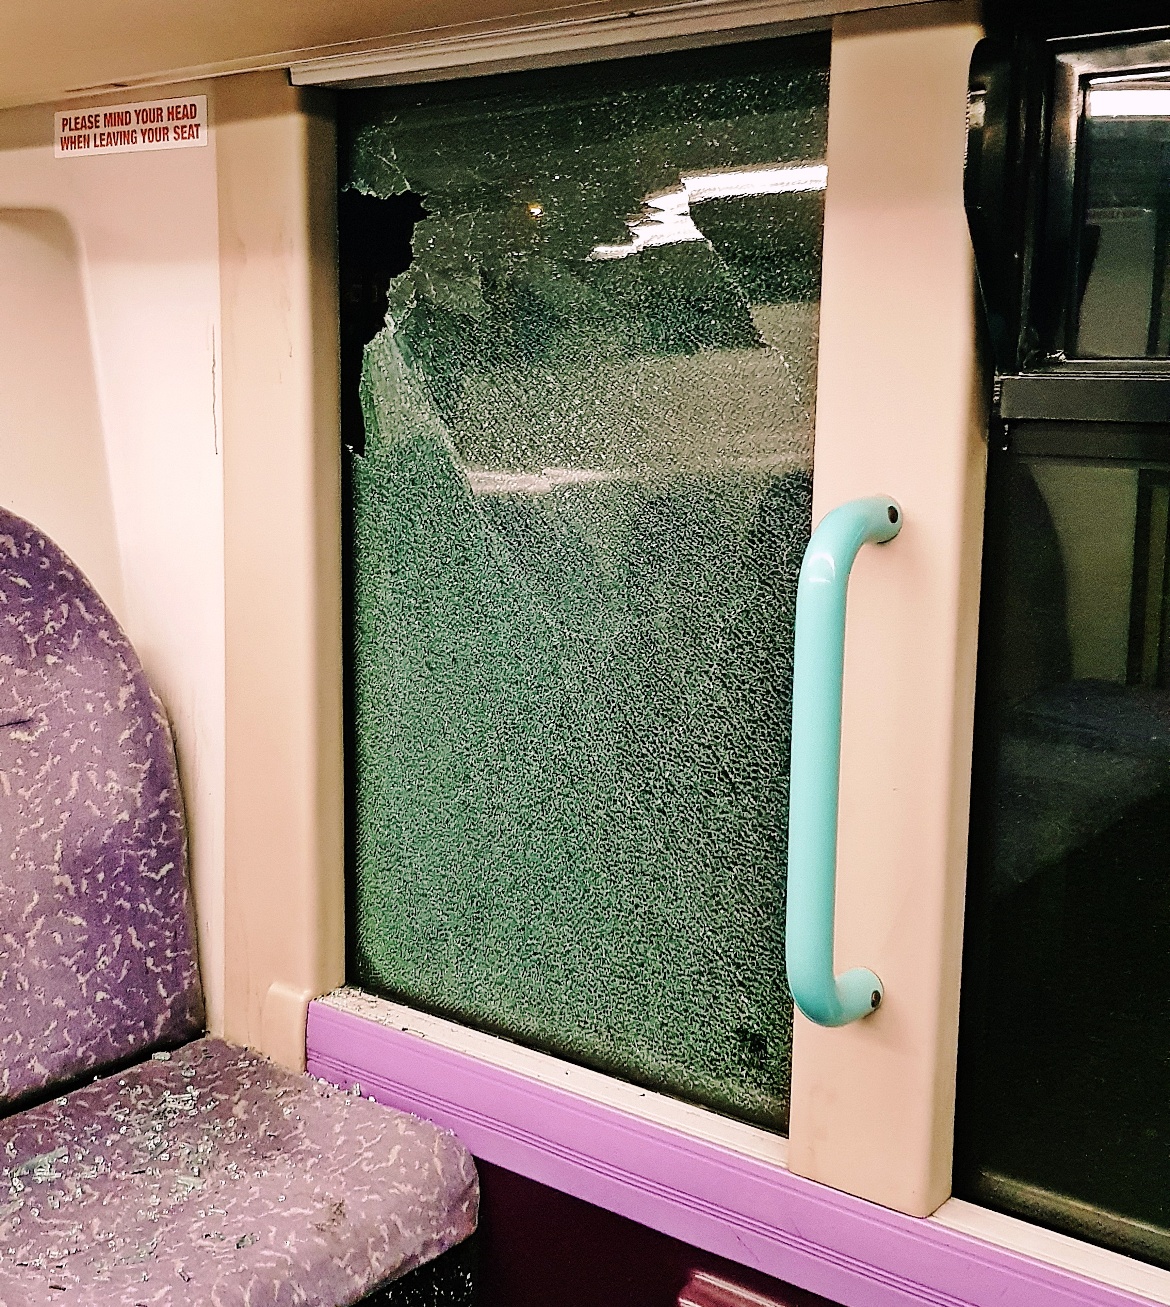 A smashed bus window - February 2018 Monthly Recap by BeckyBecky Blogs